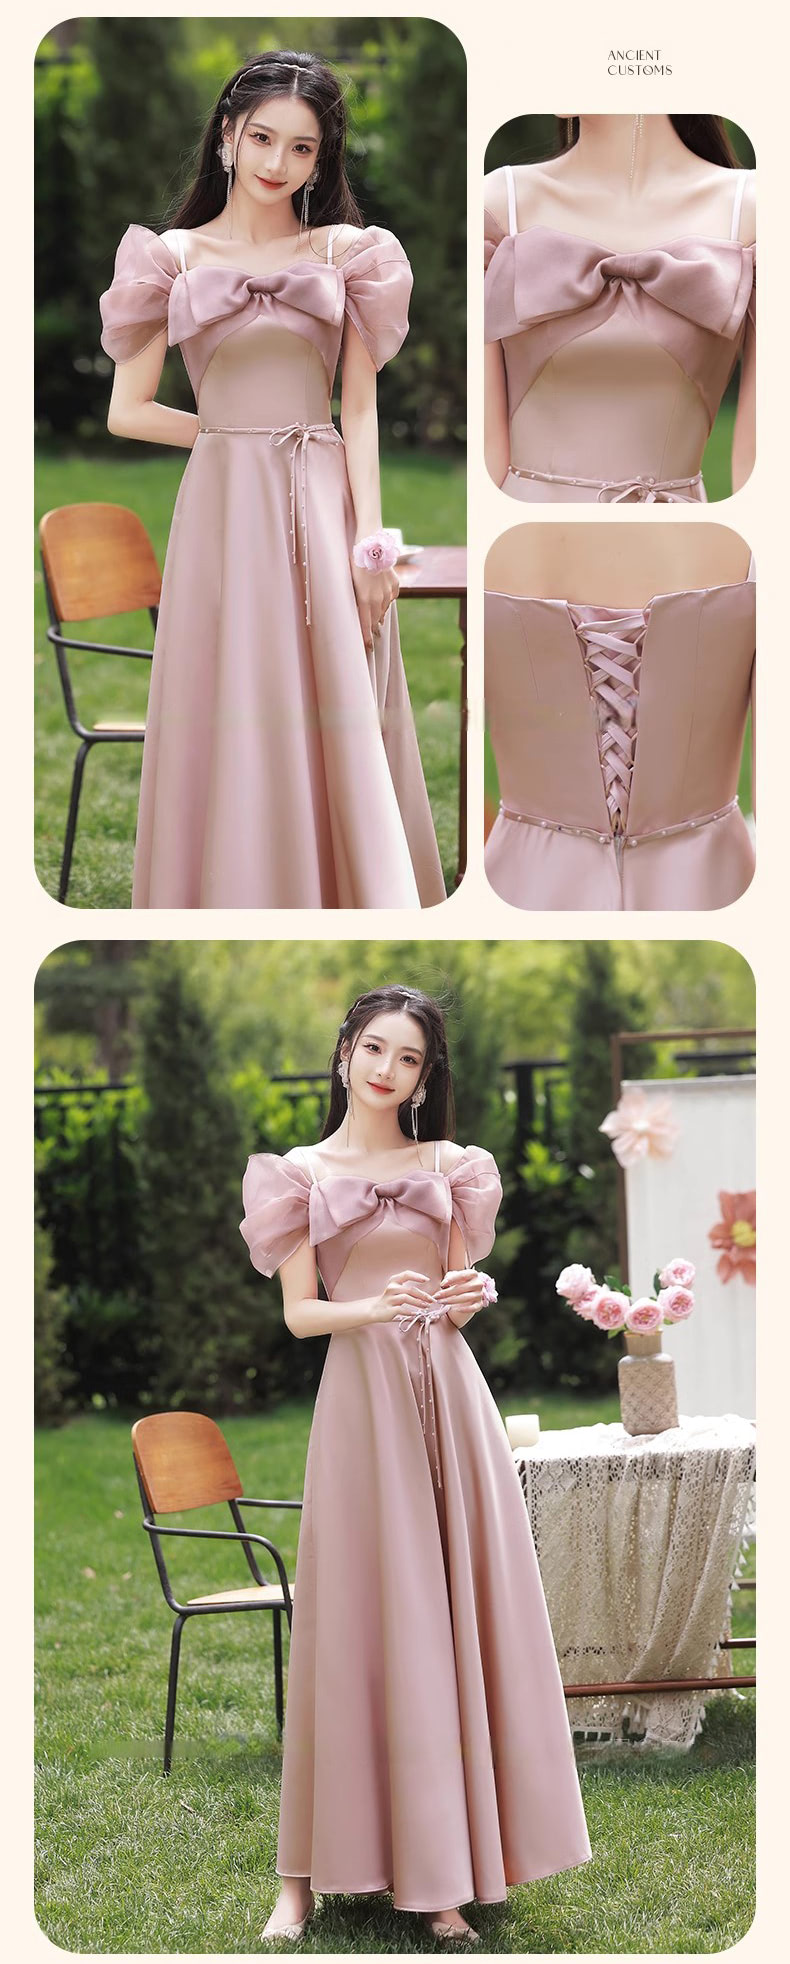 Sweet-Pink-Satin-Bridesmaid-Dress-Wedding-Prom-Guest-Formal-Outfit17